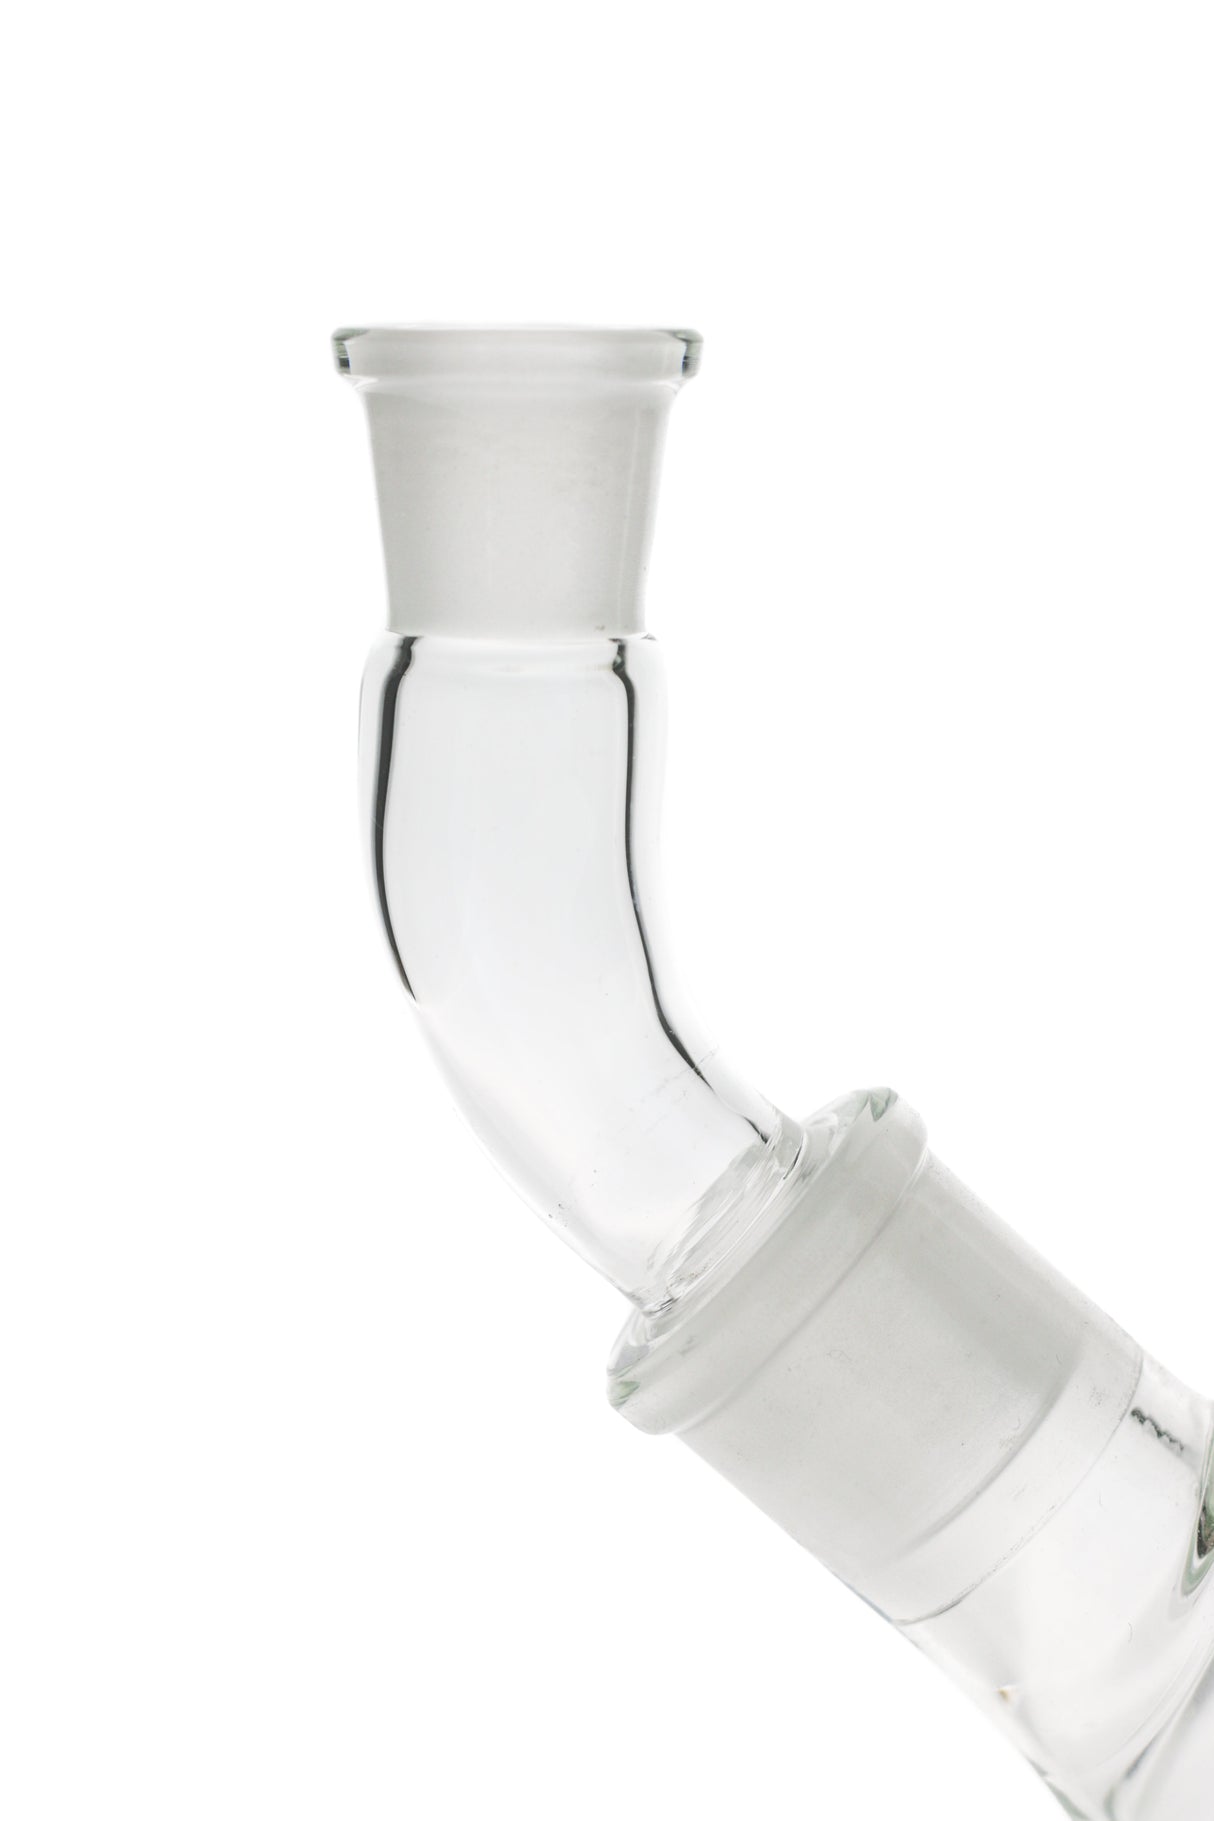 Thick Ass Glass Angle Adapter for Bongs, Clear Quartz, Male to Female Joint - Side View